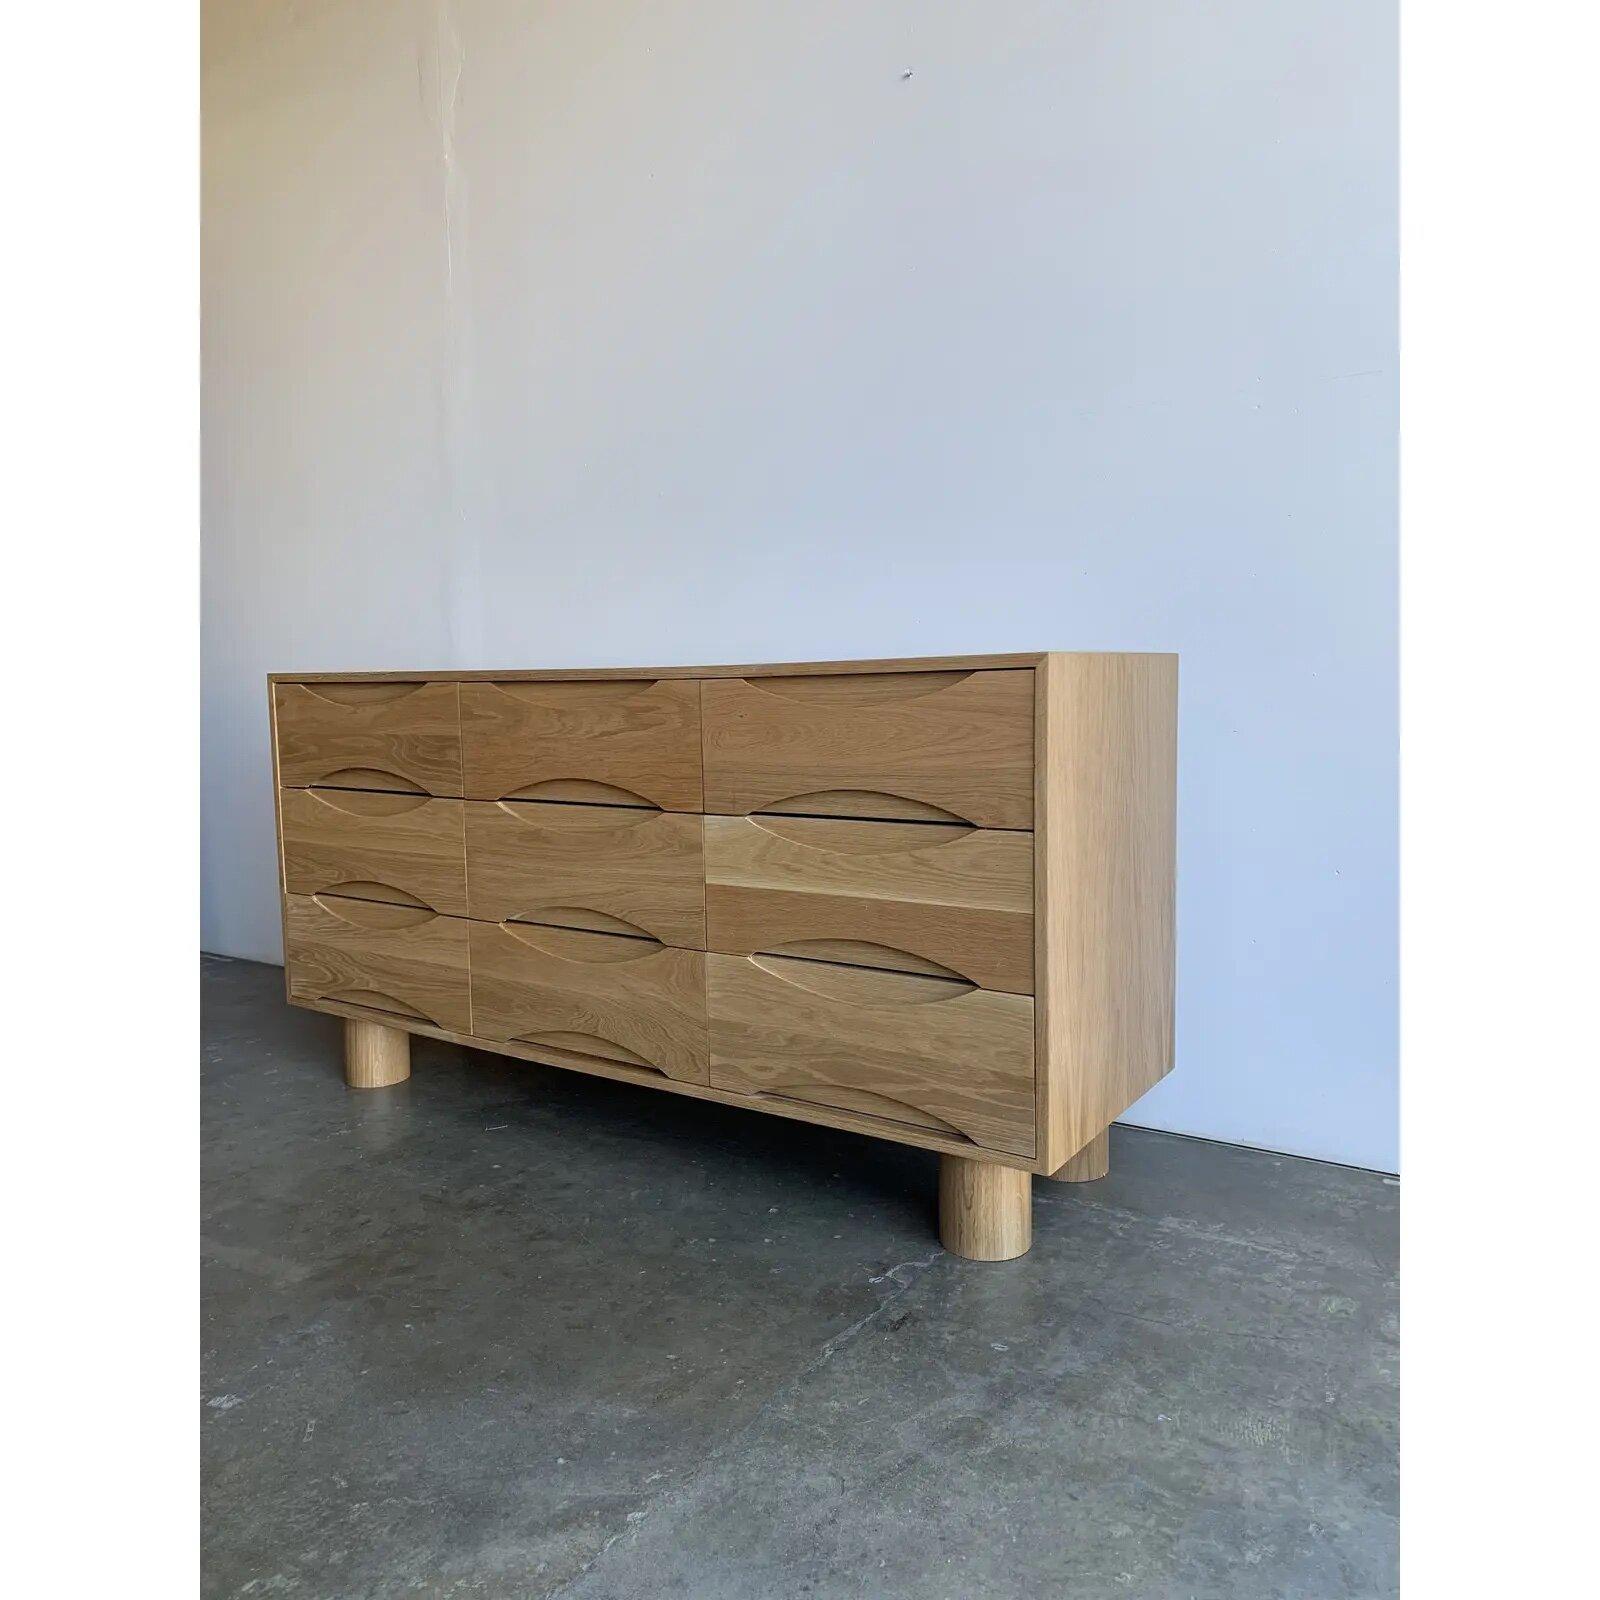 Handcrafted in house the “ojitos “ dresser is made from solid and veneered whtie oak with solid turned thick Cyclinder legs. All twelve drawers featured sculpted handles. Item sits on four solid white oak cinder legs and is completely sealed with a